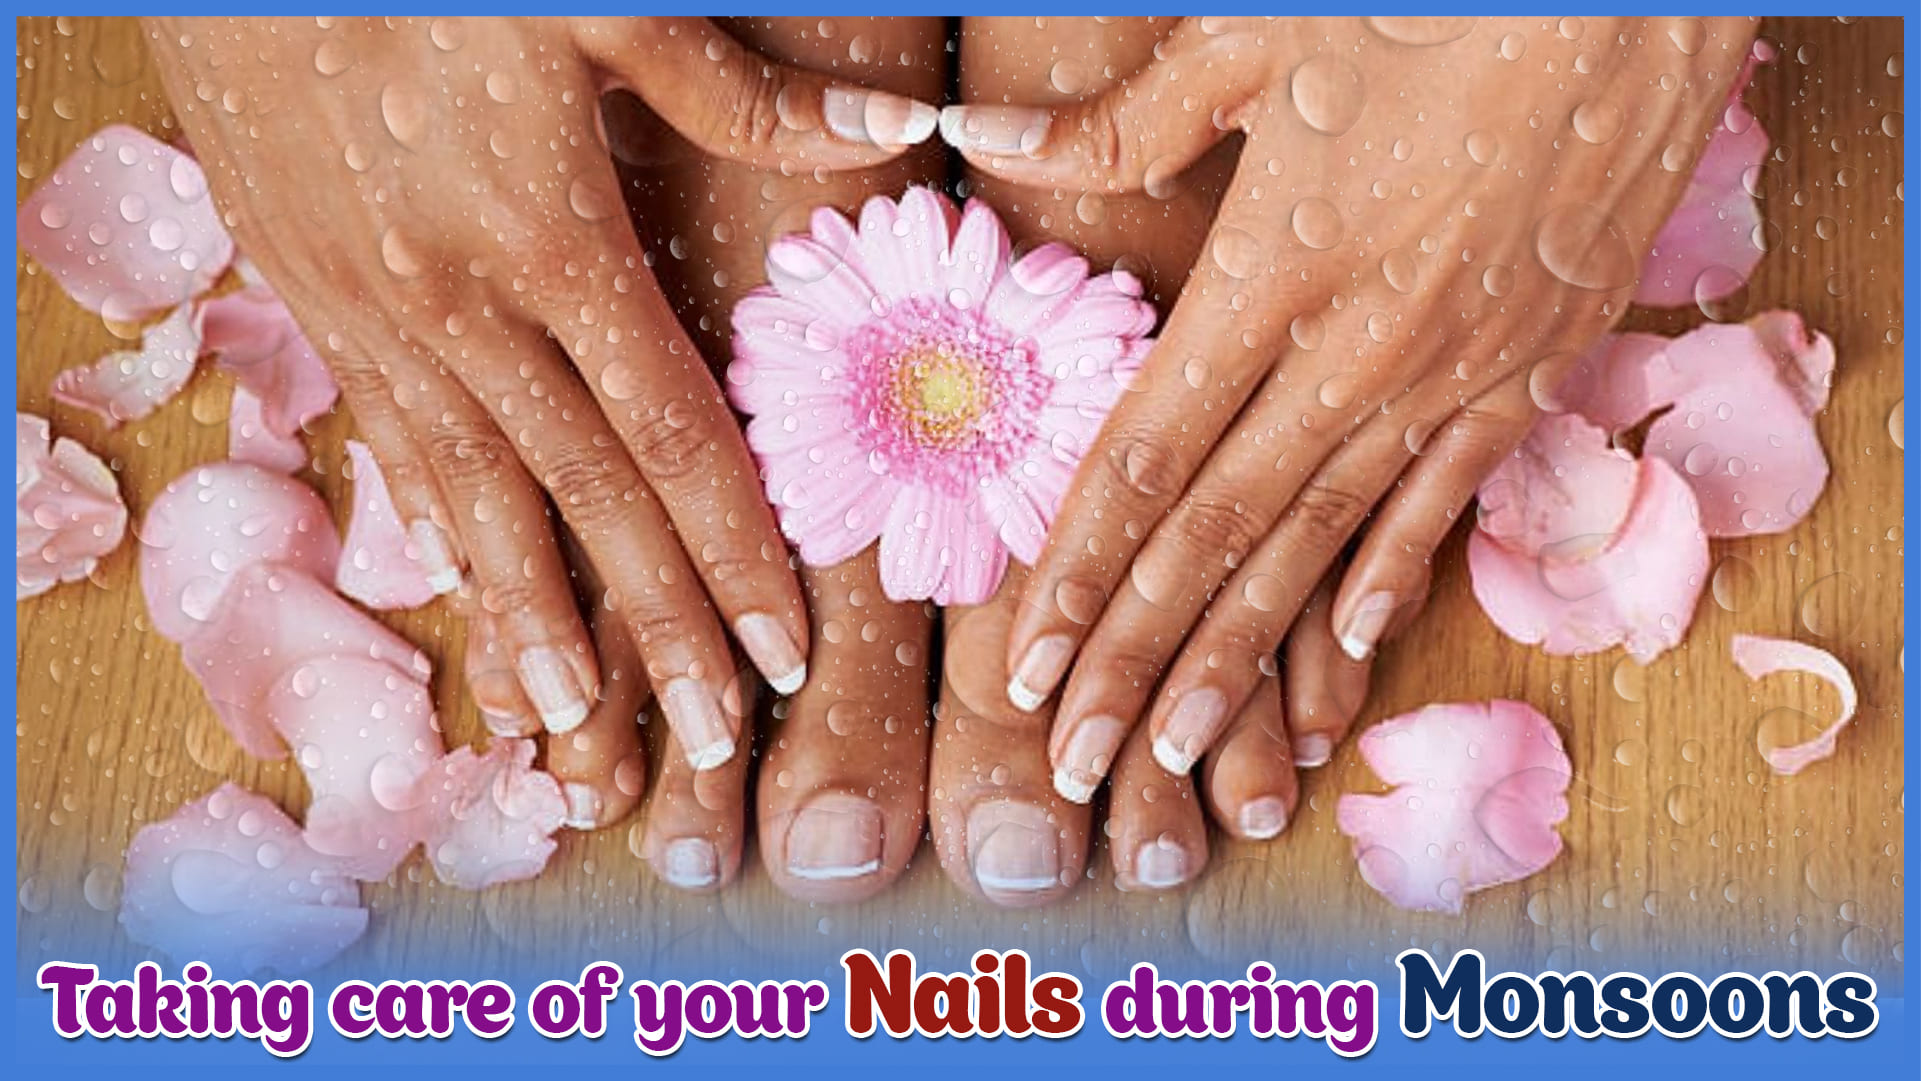 Taking care of your nails during monsoons